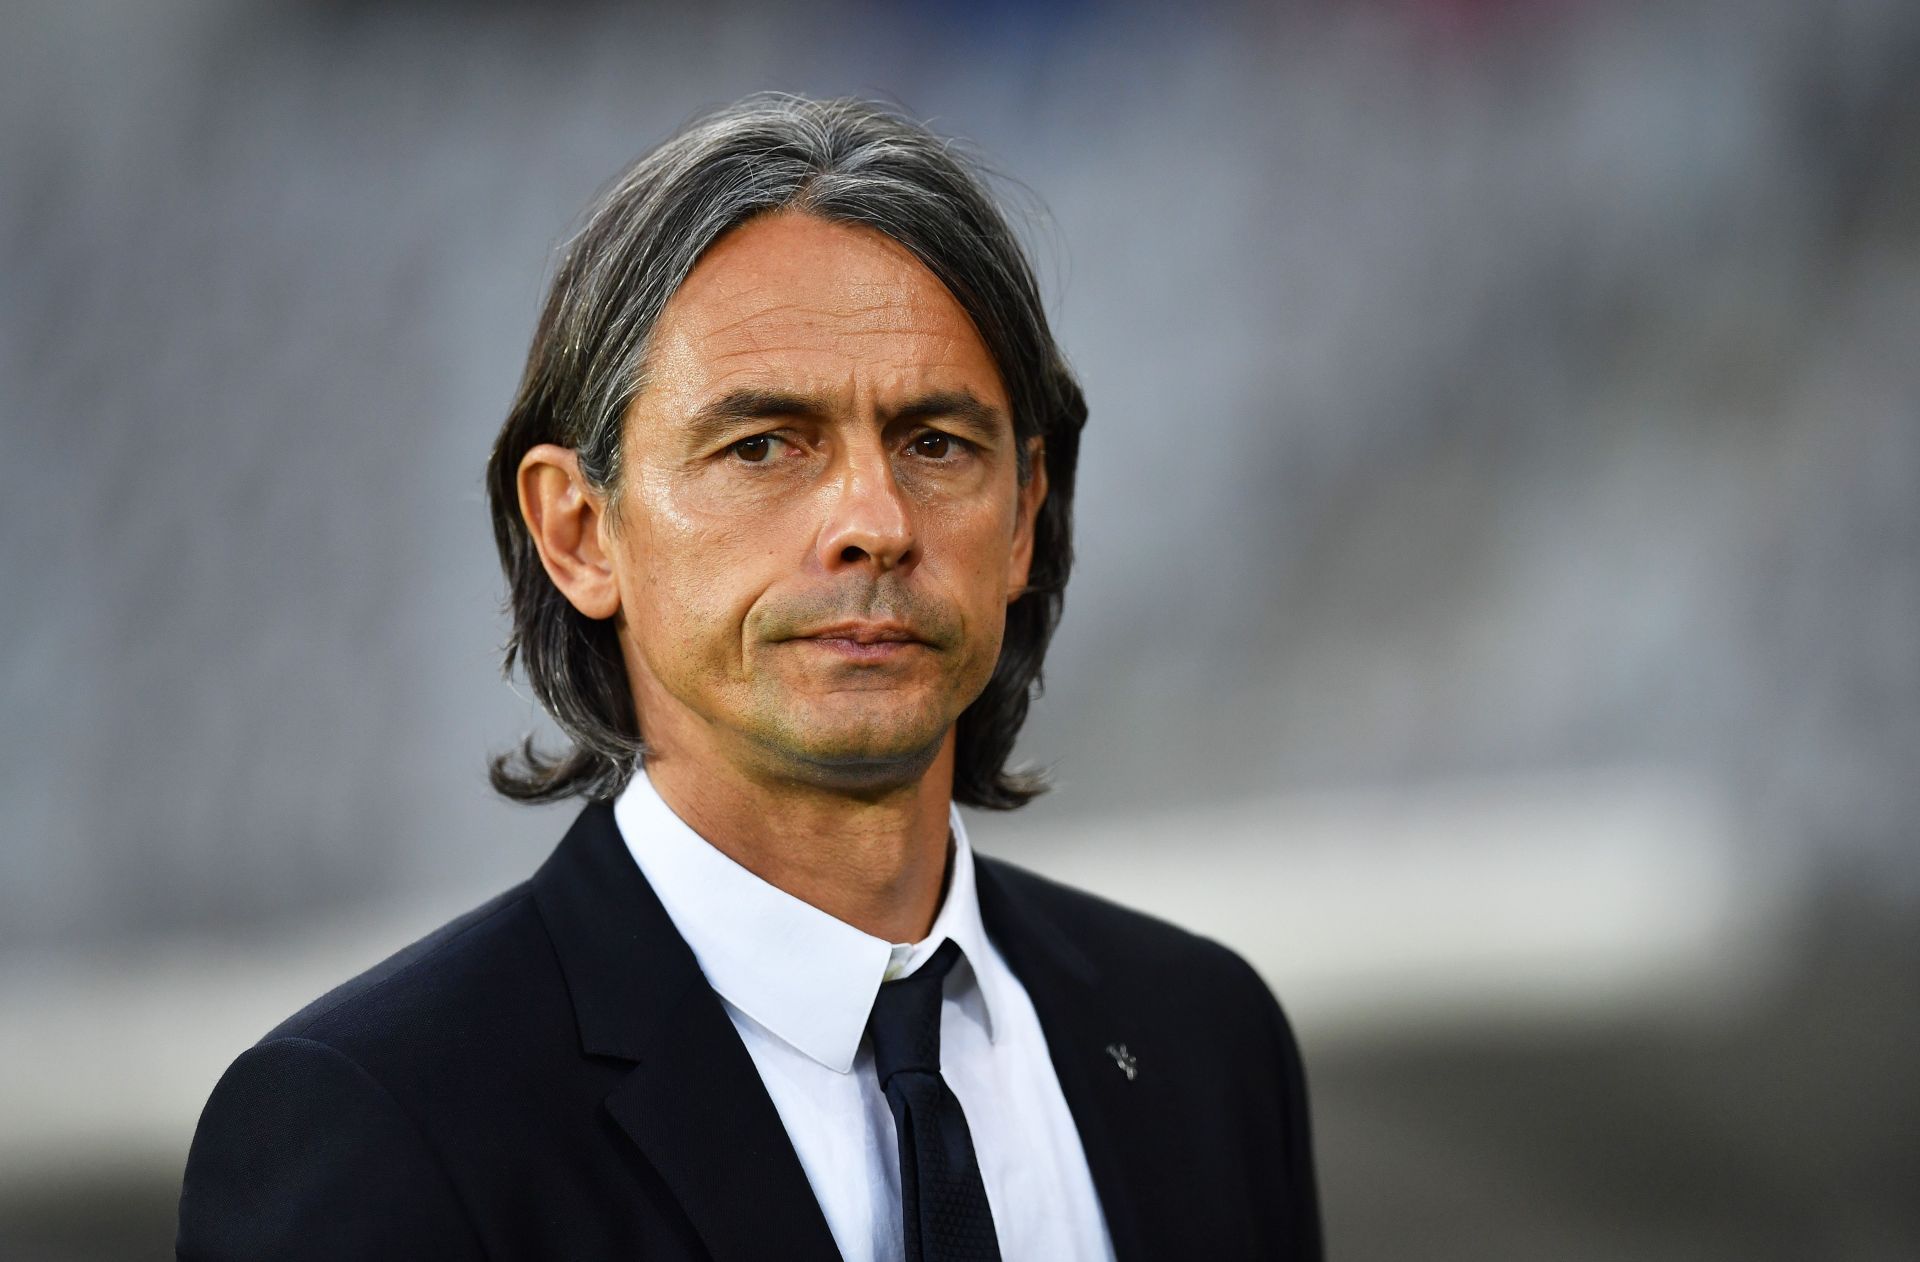 Inzaghi is one of the most prolific strikers to have emerged from Italy.